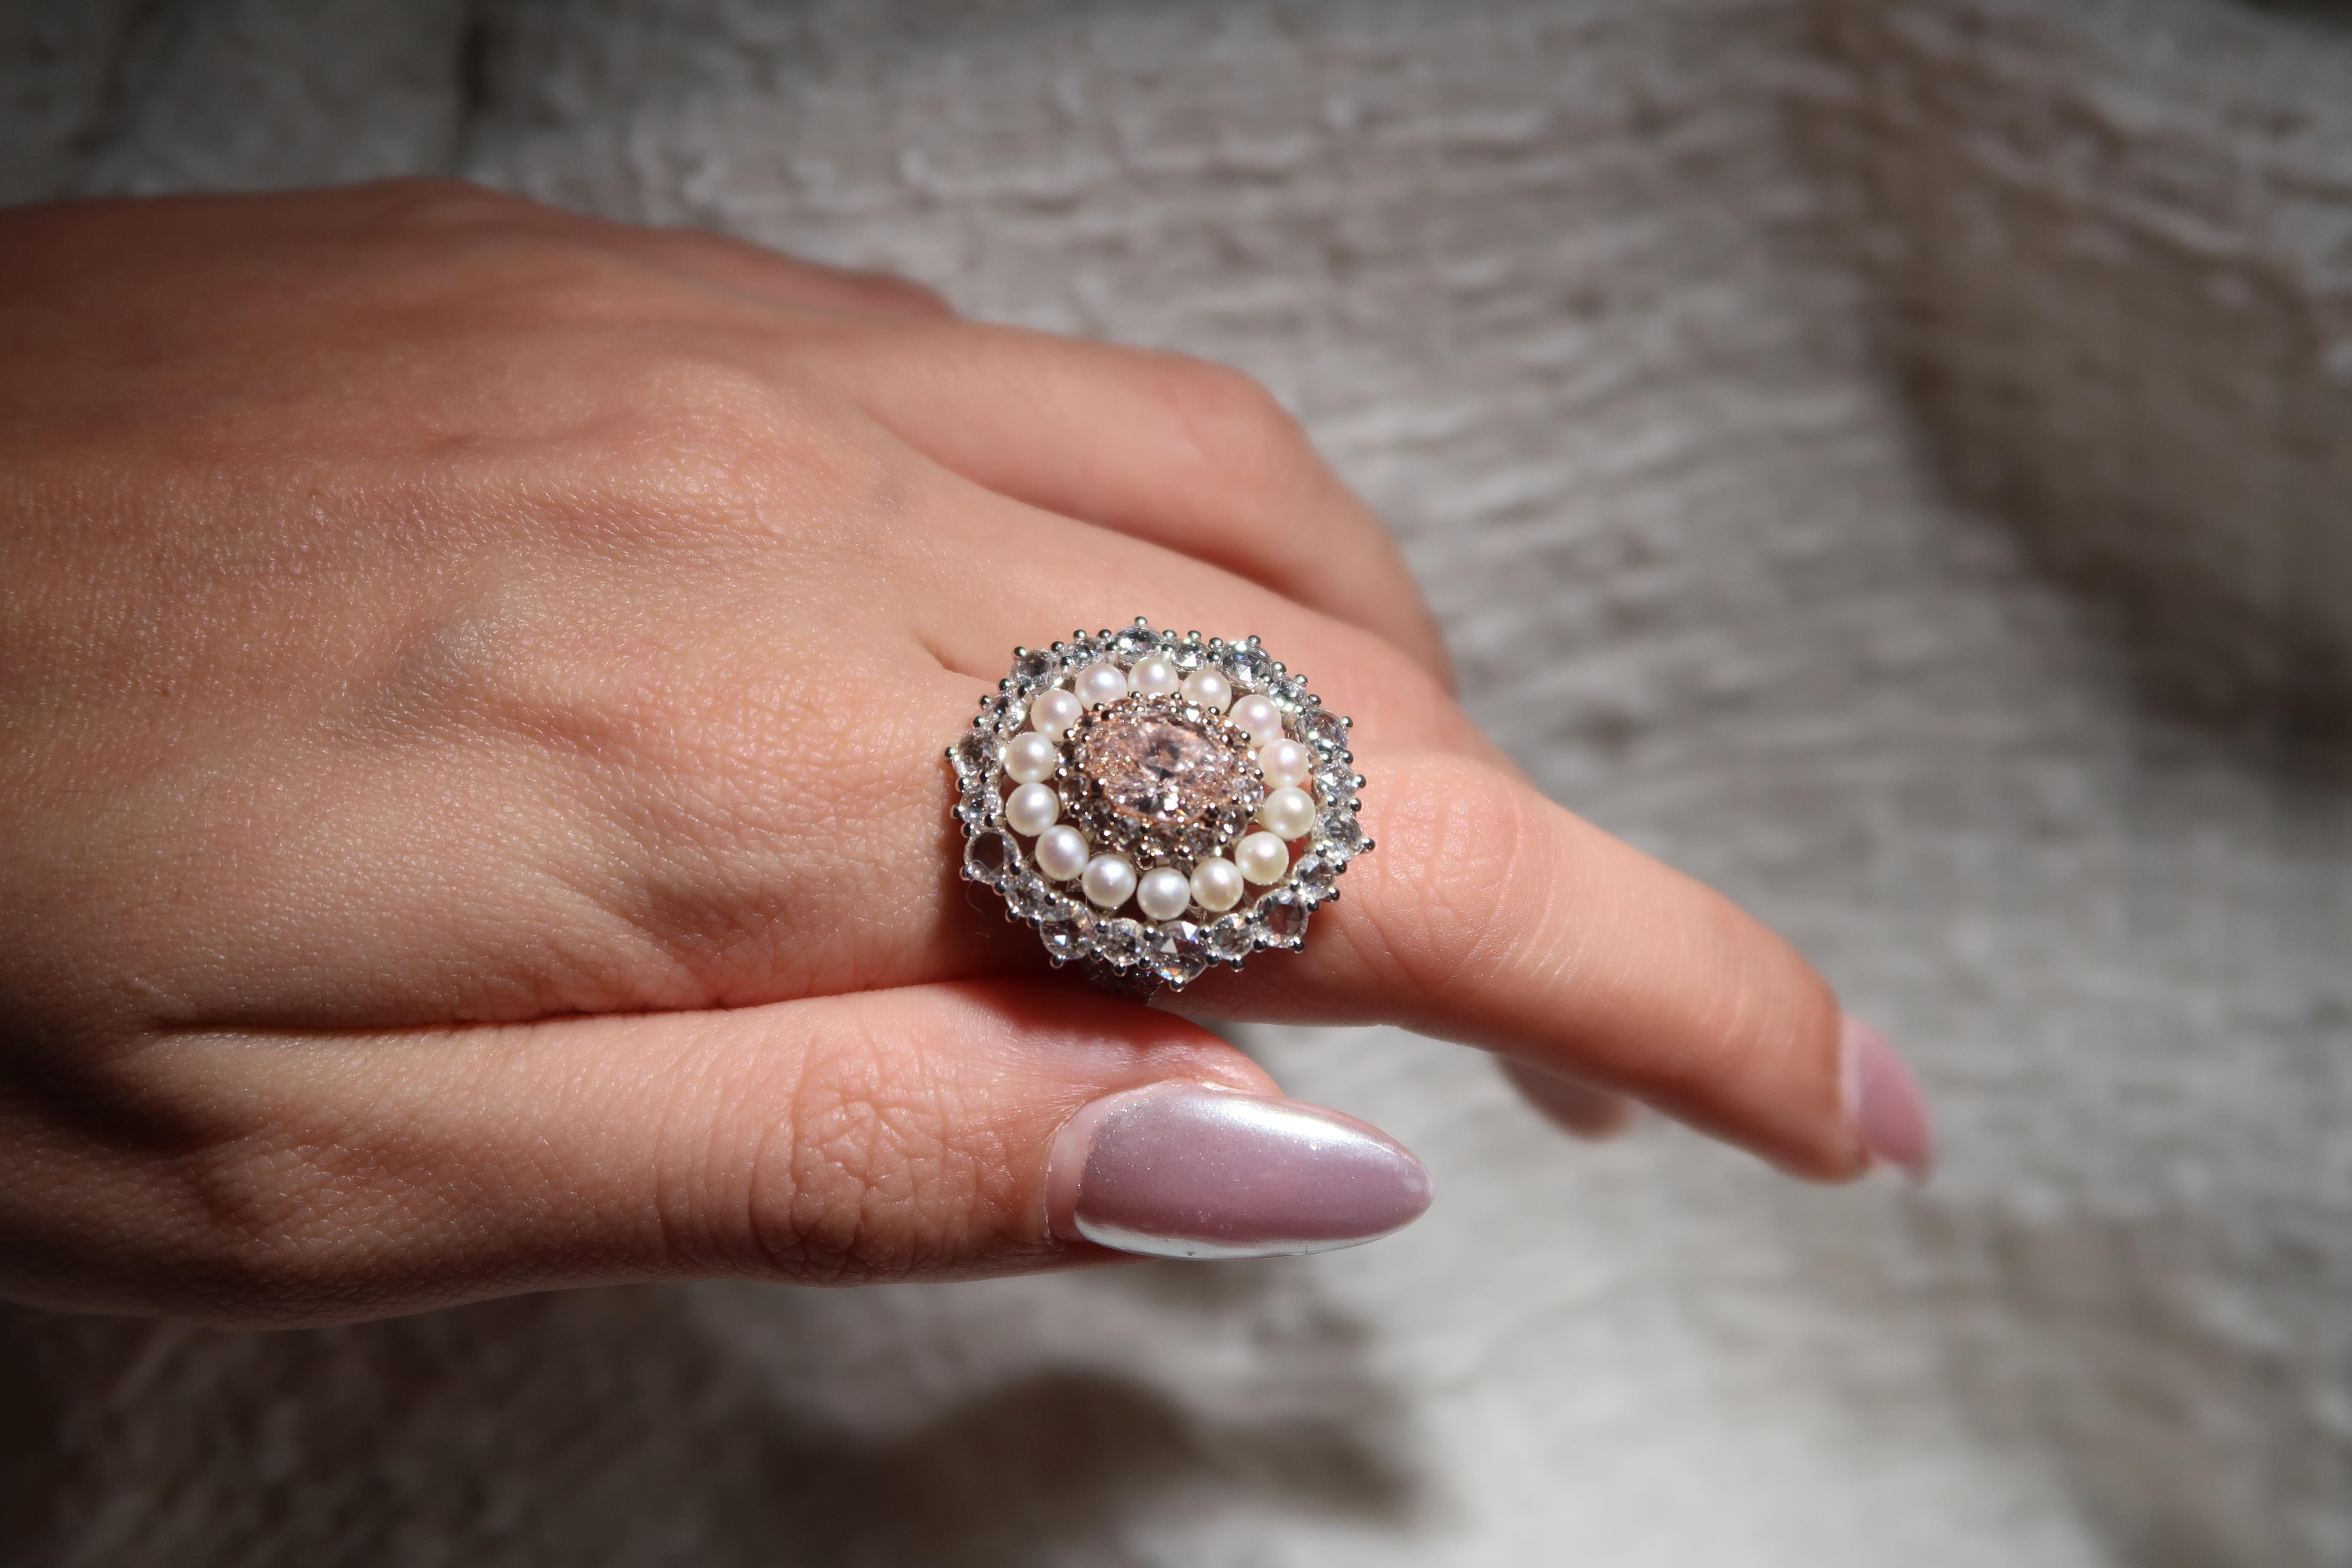 Victorian 1.42 Carat Fancy Pink-Brown Diamond Cocktail Ring With Pearls, GIA Rerport. For Sale